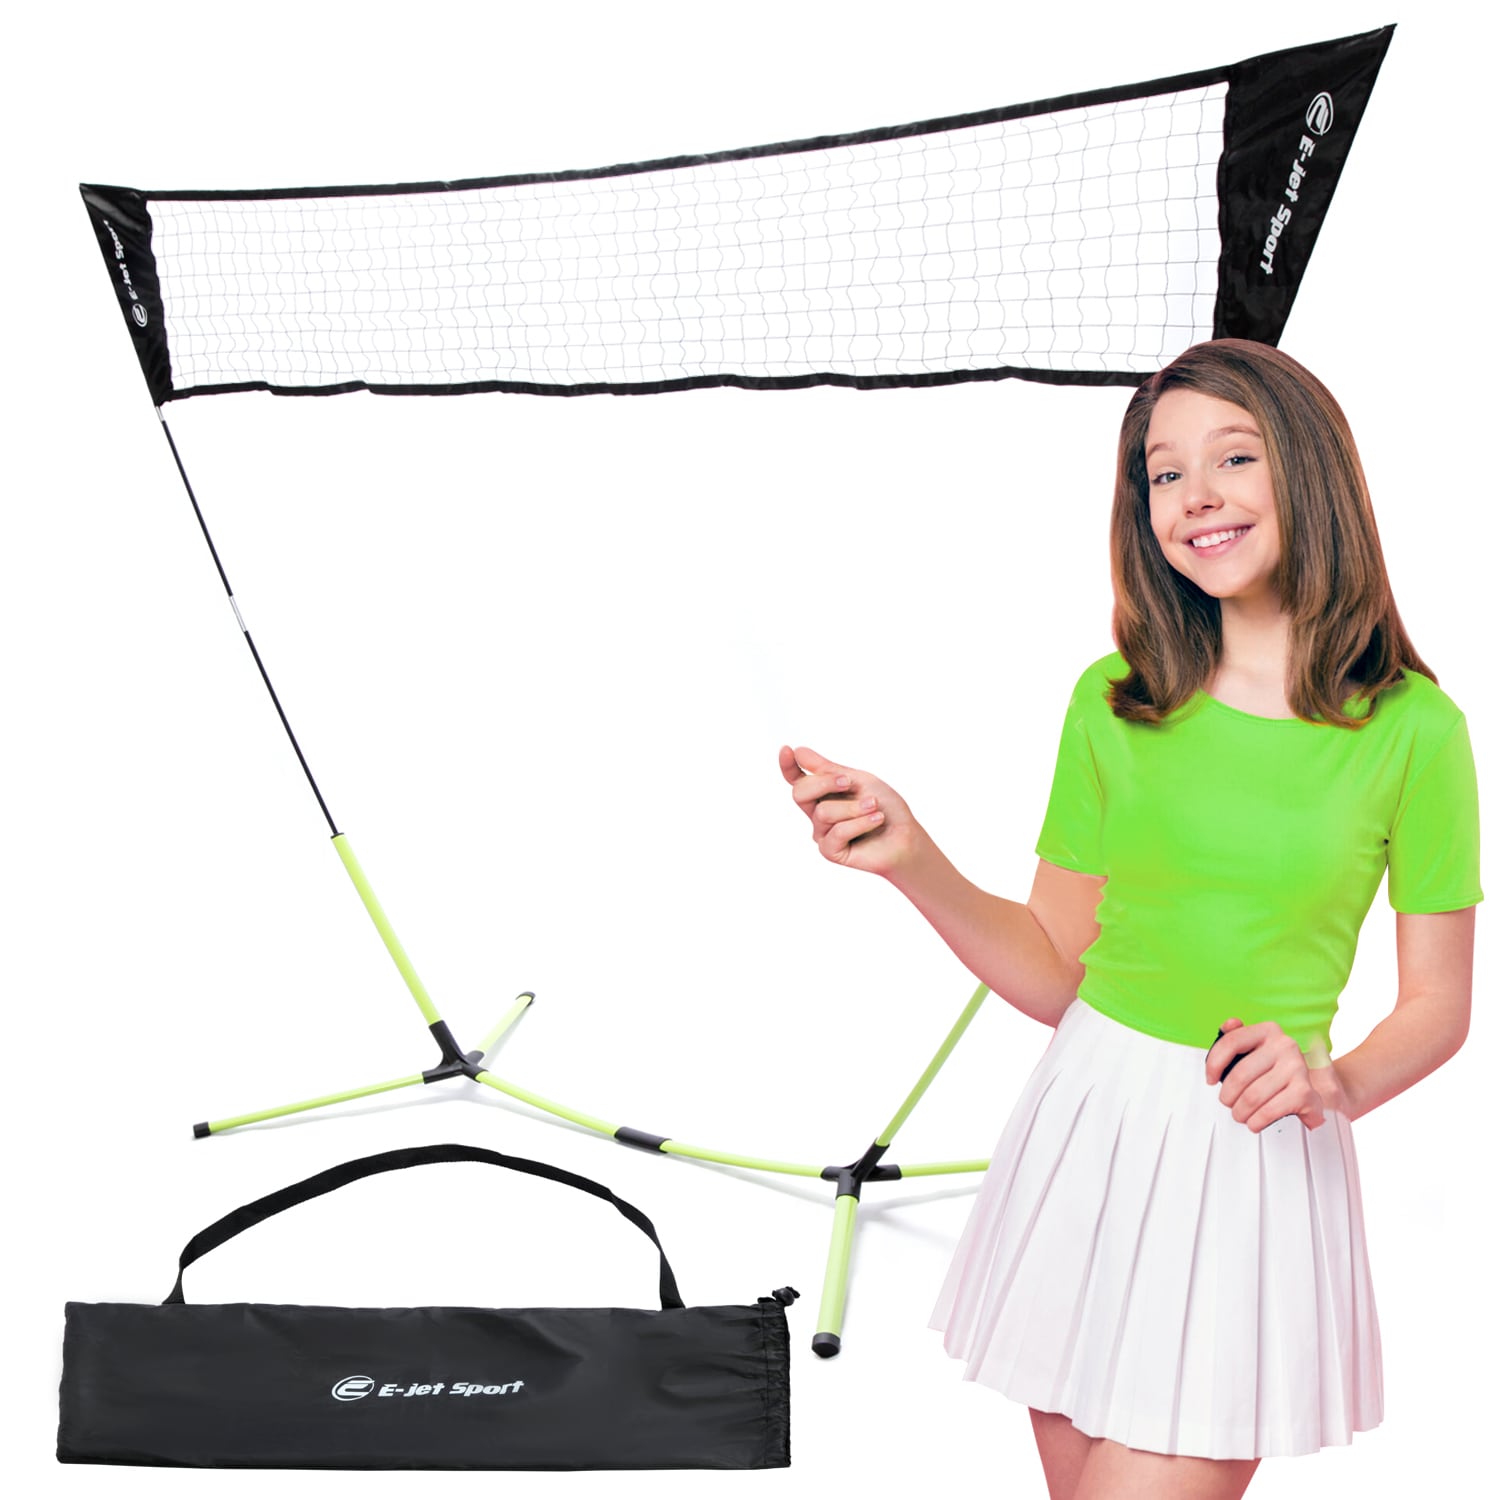 E-jet Sport E-Jet Portable Badminton Net, No Tools Required, Net Only in the Sports Equipment department at Lowes